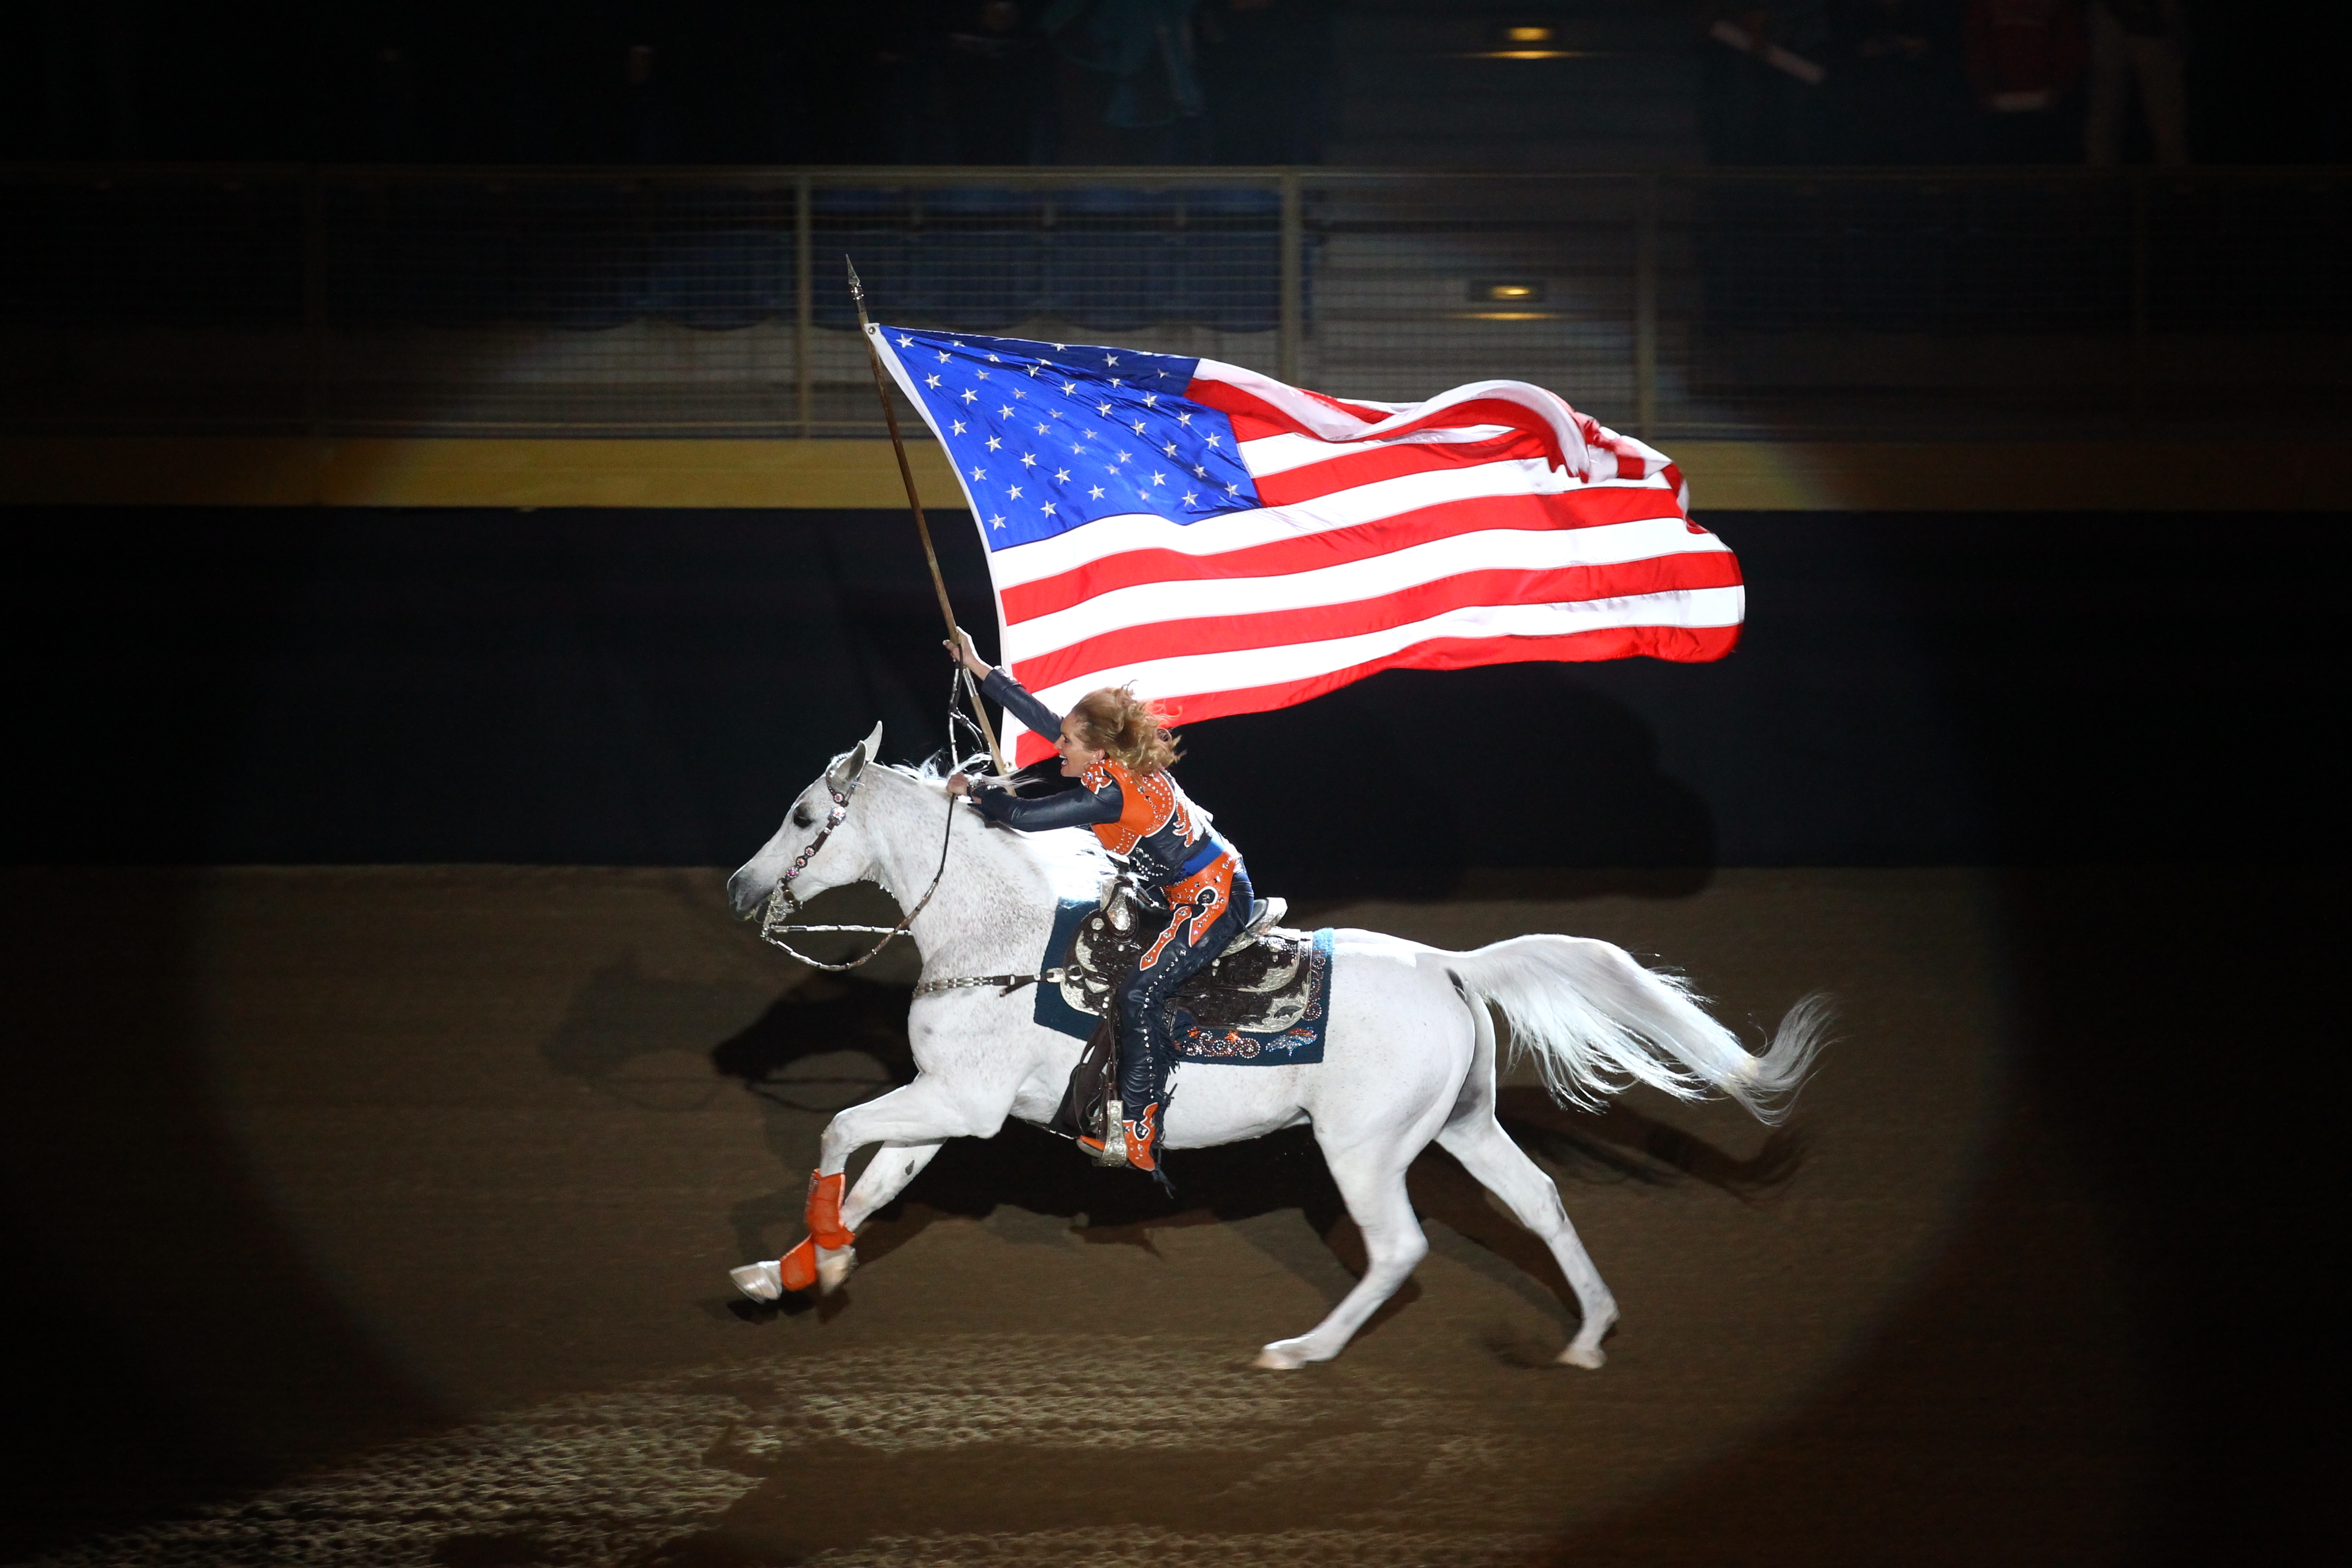 Photography: Courtesy National Western Stock Show